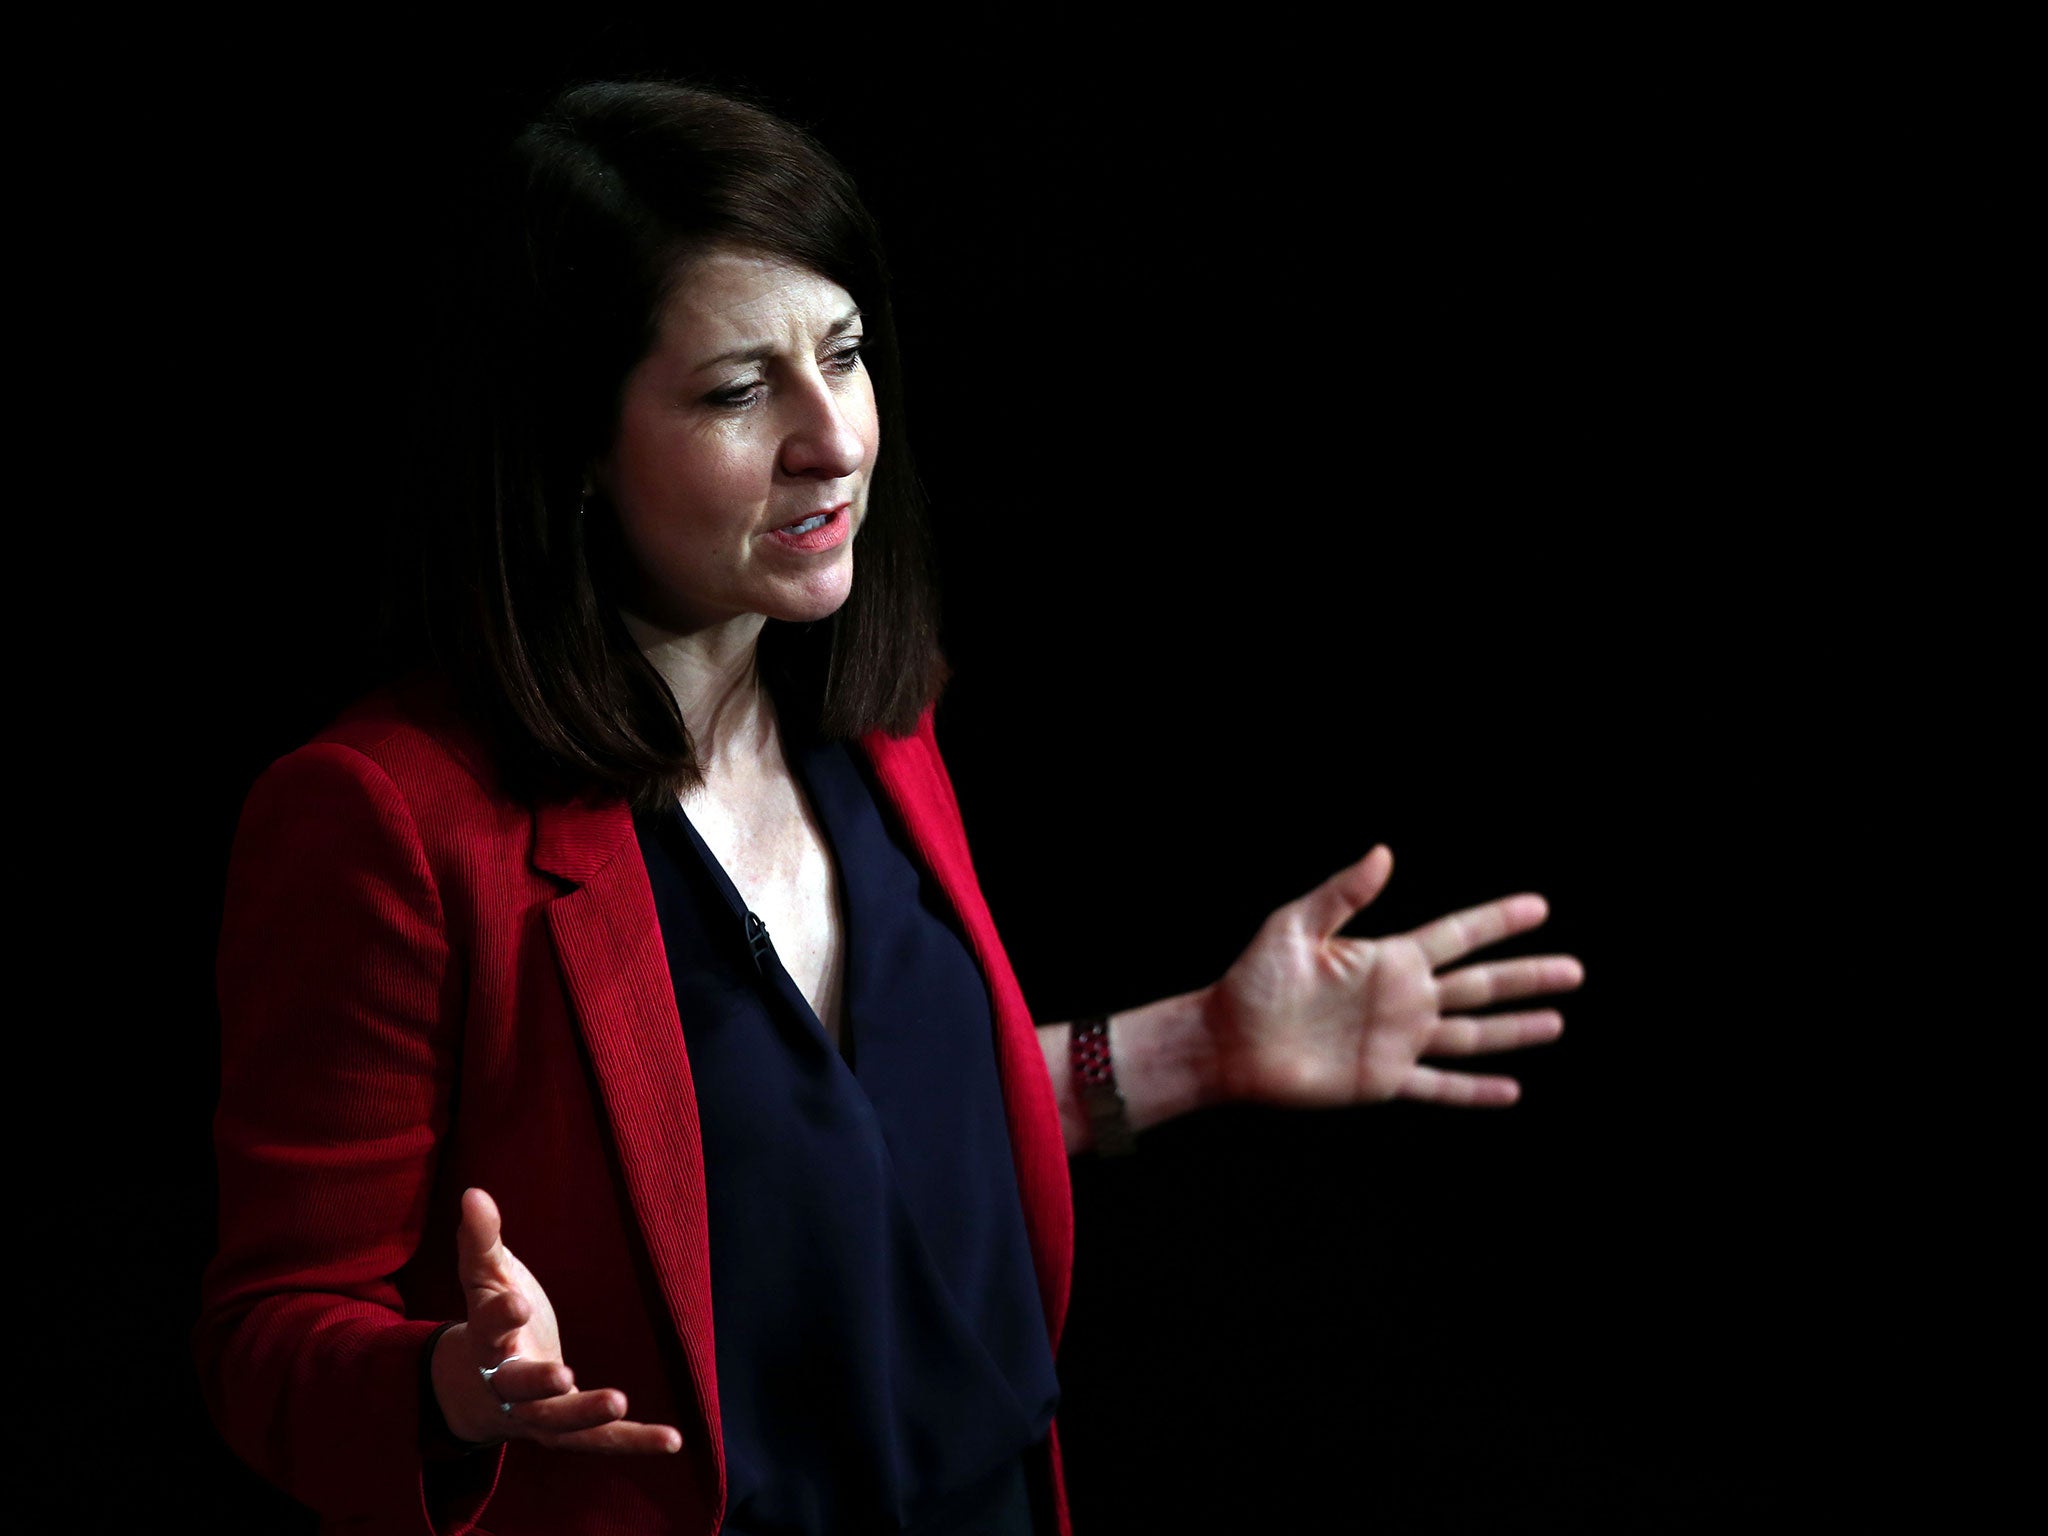 Liz Kendall, one of the candidates for the Labour leadership election